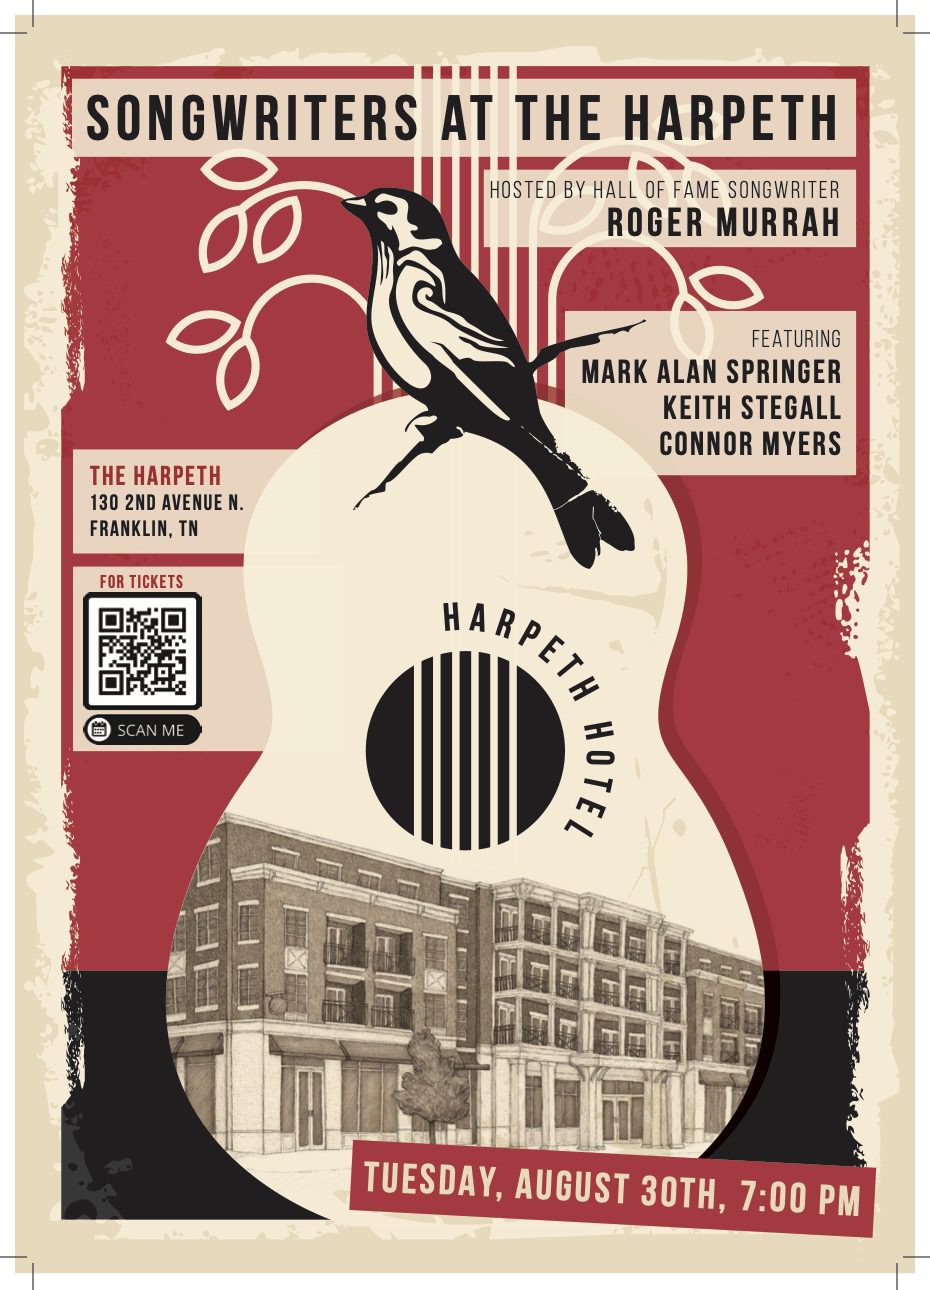 Song Writers Night in downtown Franklin, TN at The Harpeth Hotel, the community is invited to attend for an evening of songs and storytelling.